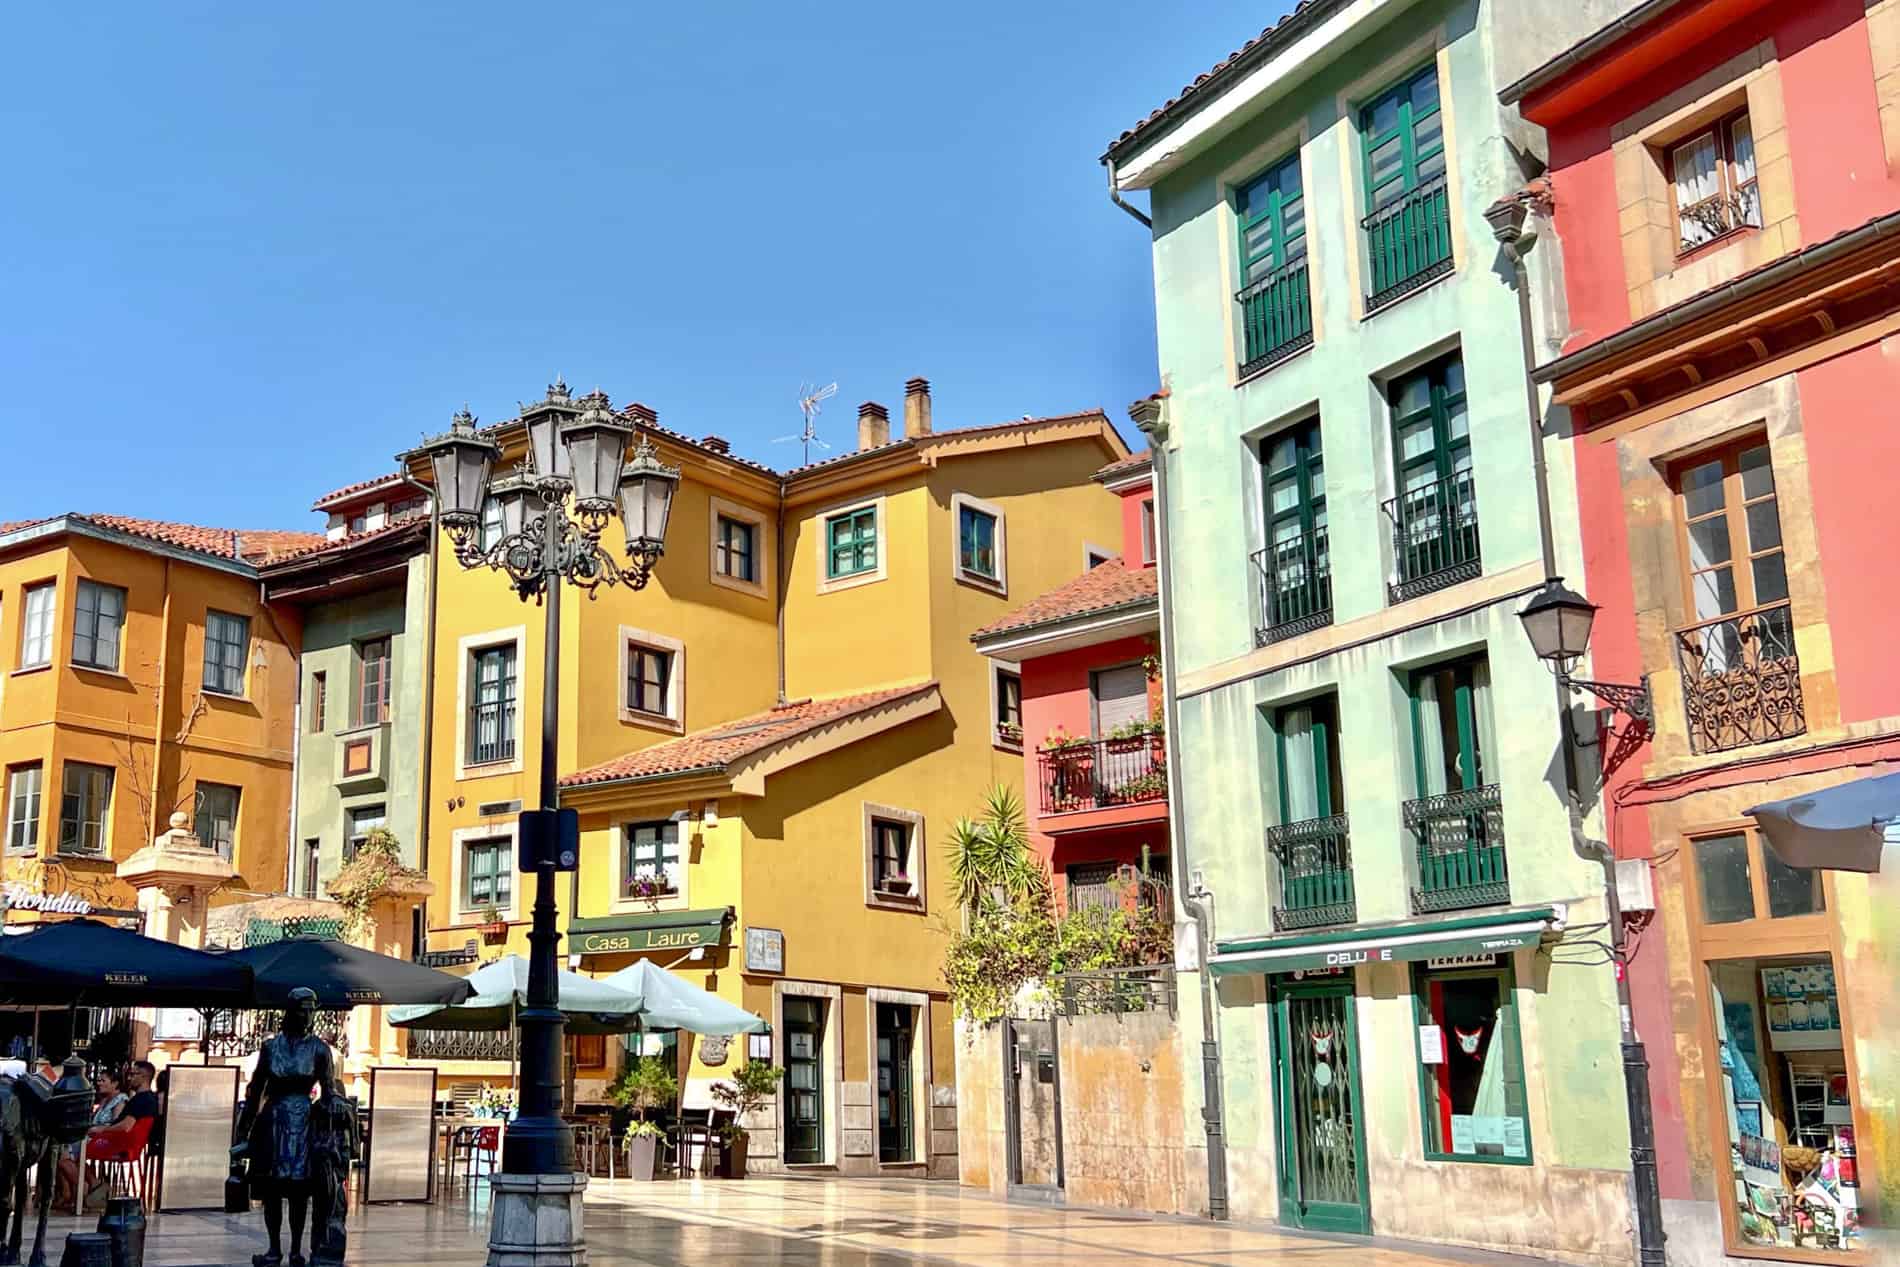 Orange, yellow, pink and mint green buildings with shops and cafes, fill the cosy Plaza Trascorrales square in Oviedo, Spain. 